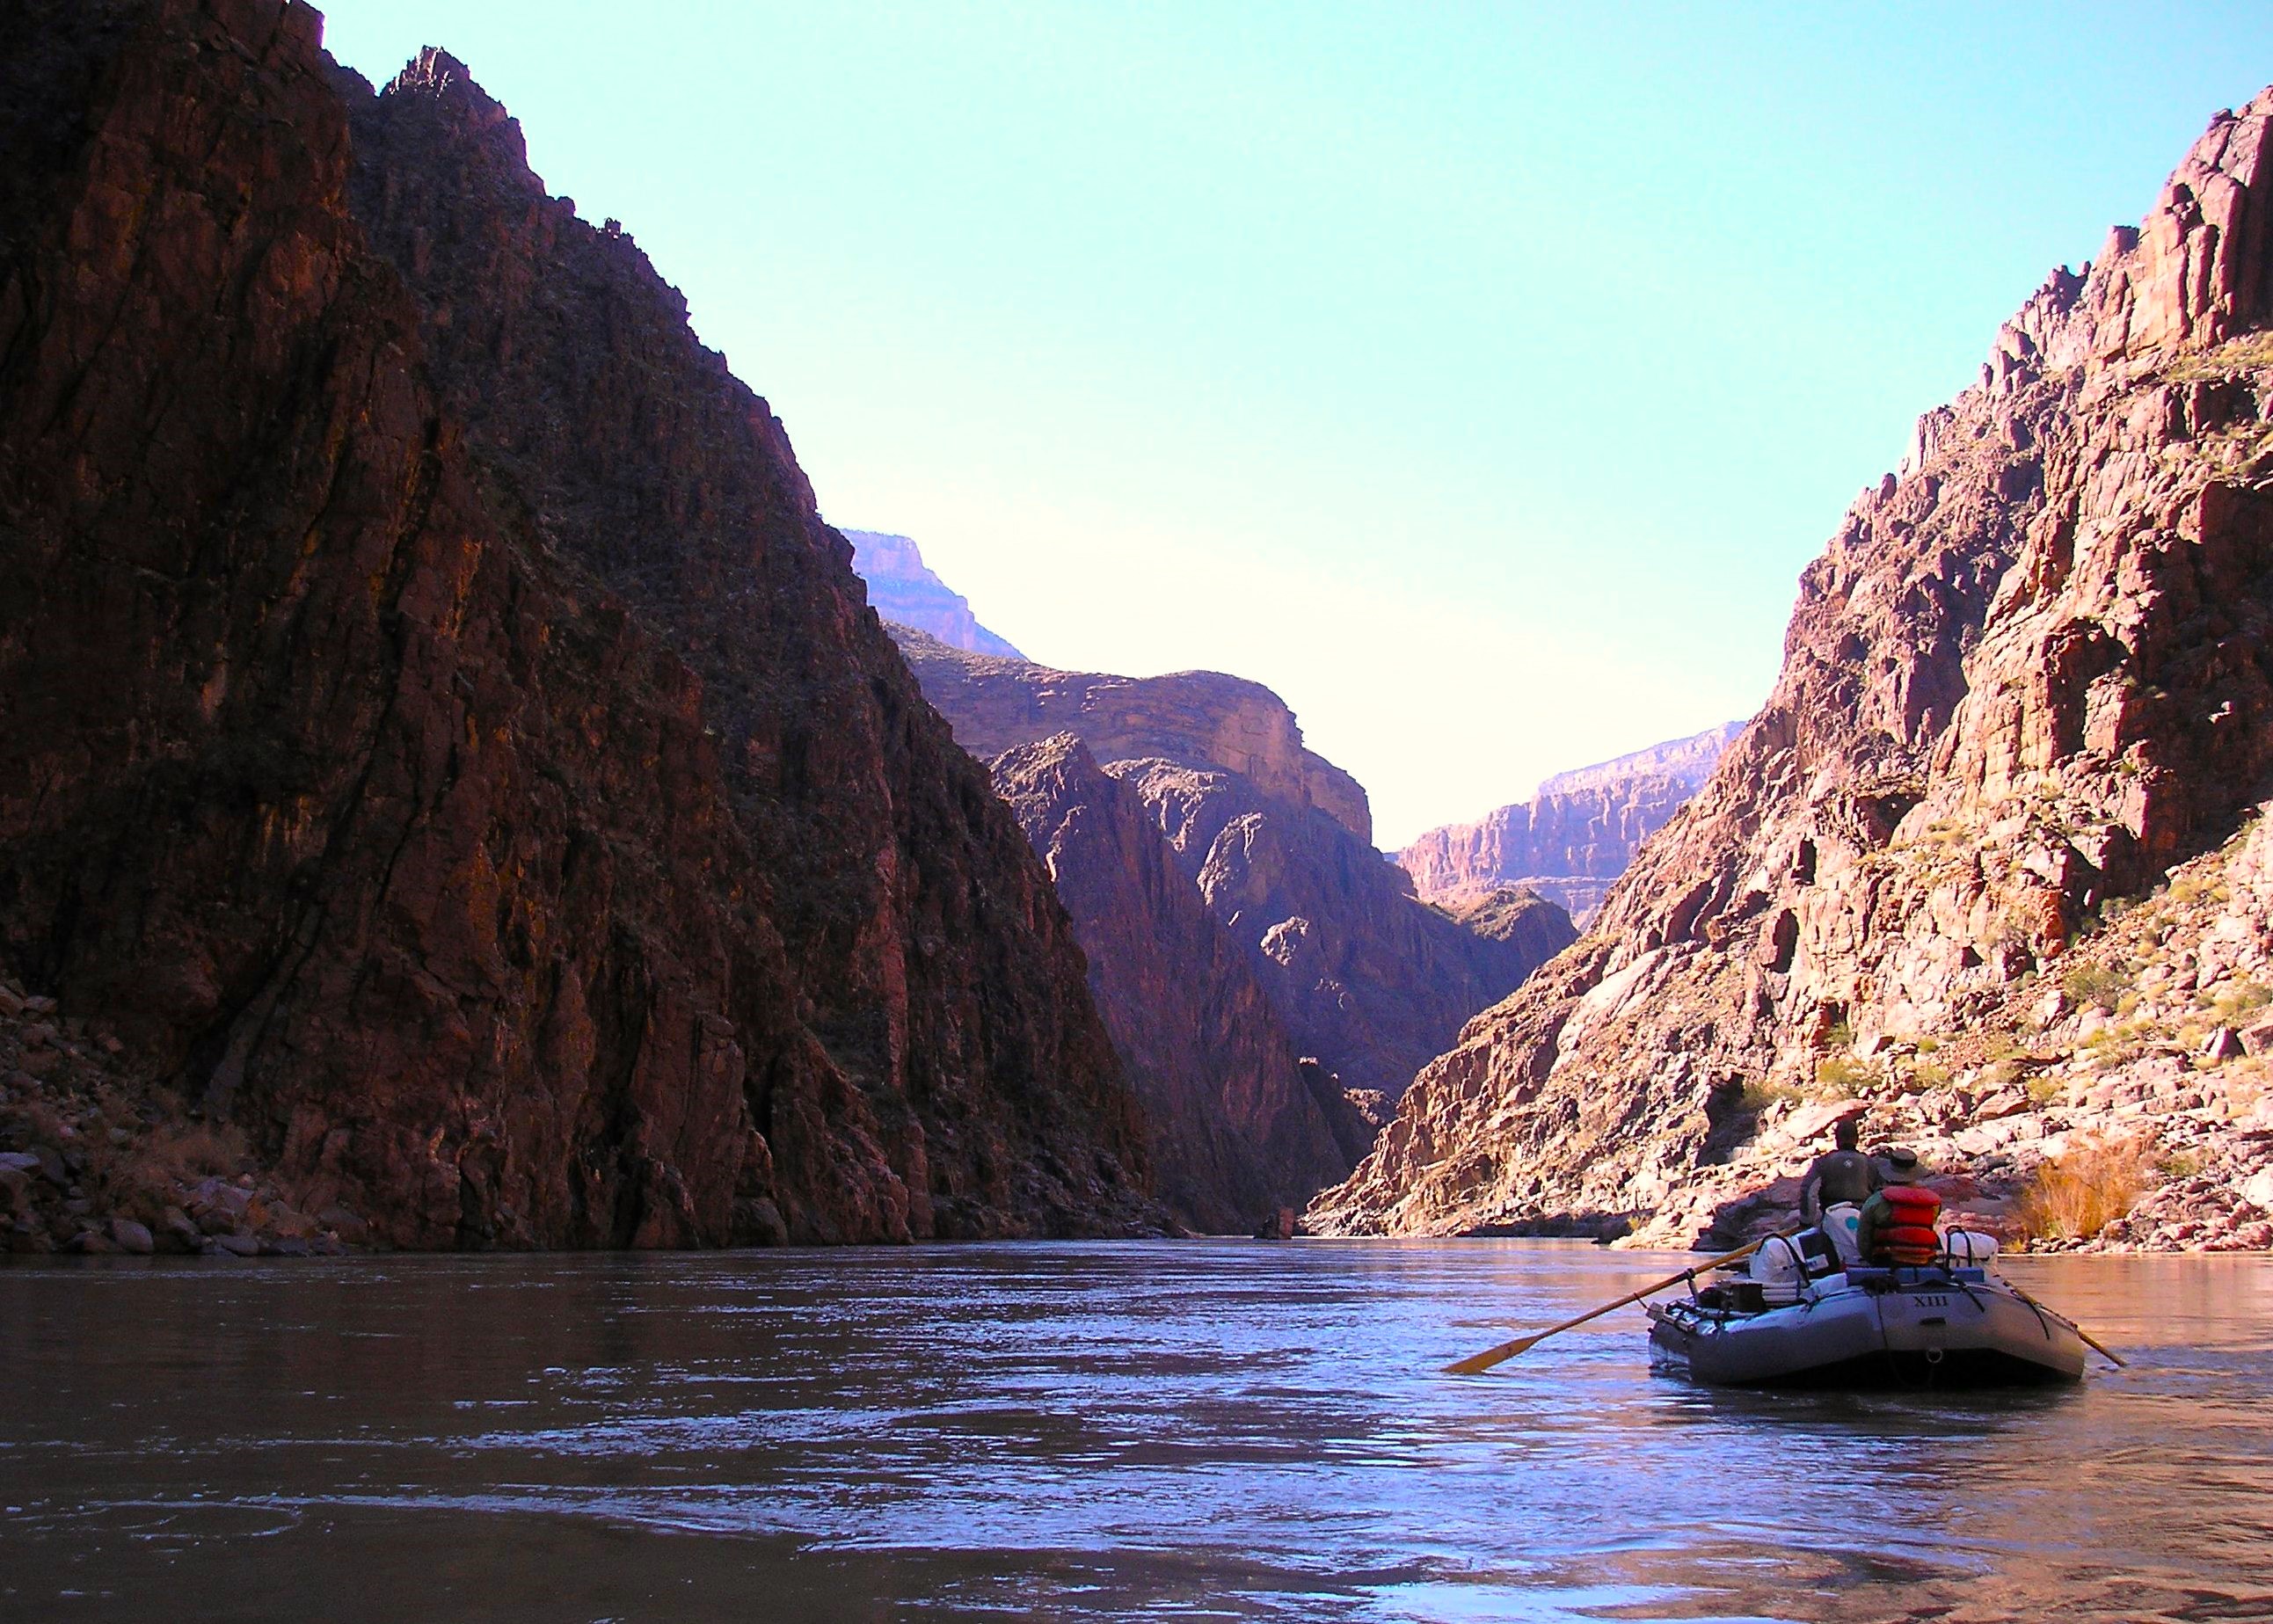 A gray boat with two passengers passes through the Granite Gorge with steep walls on each side